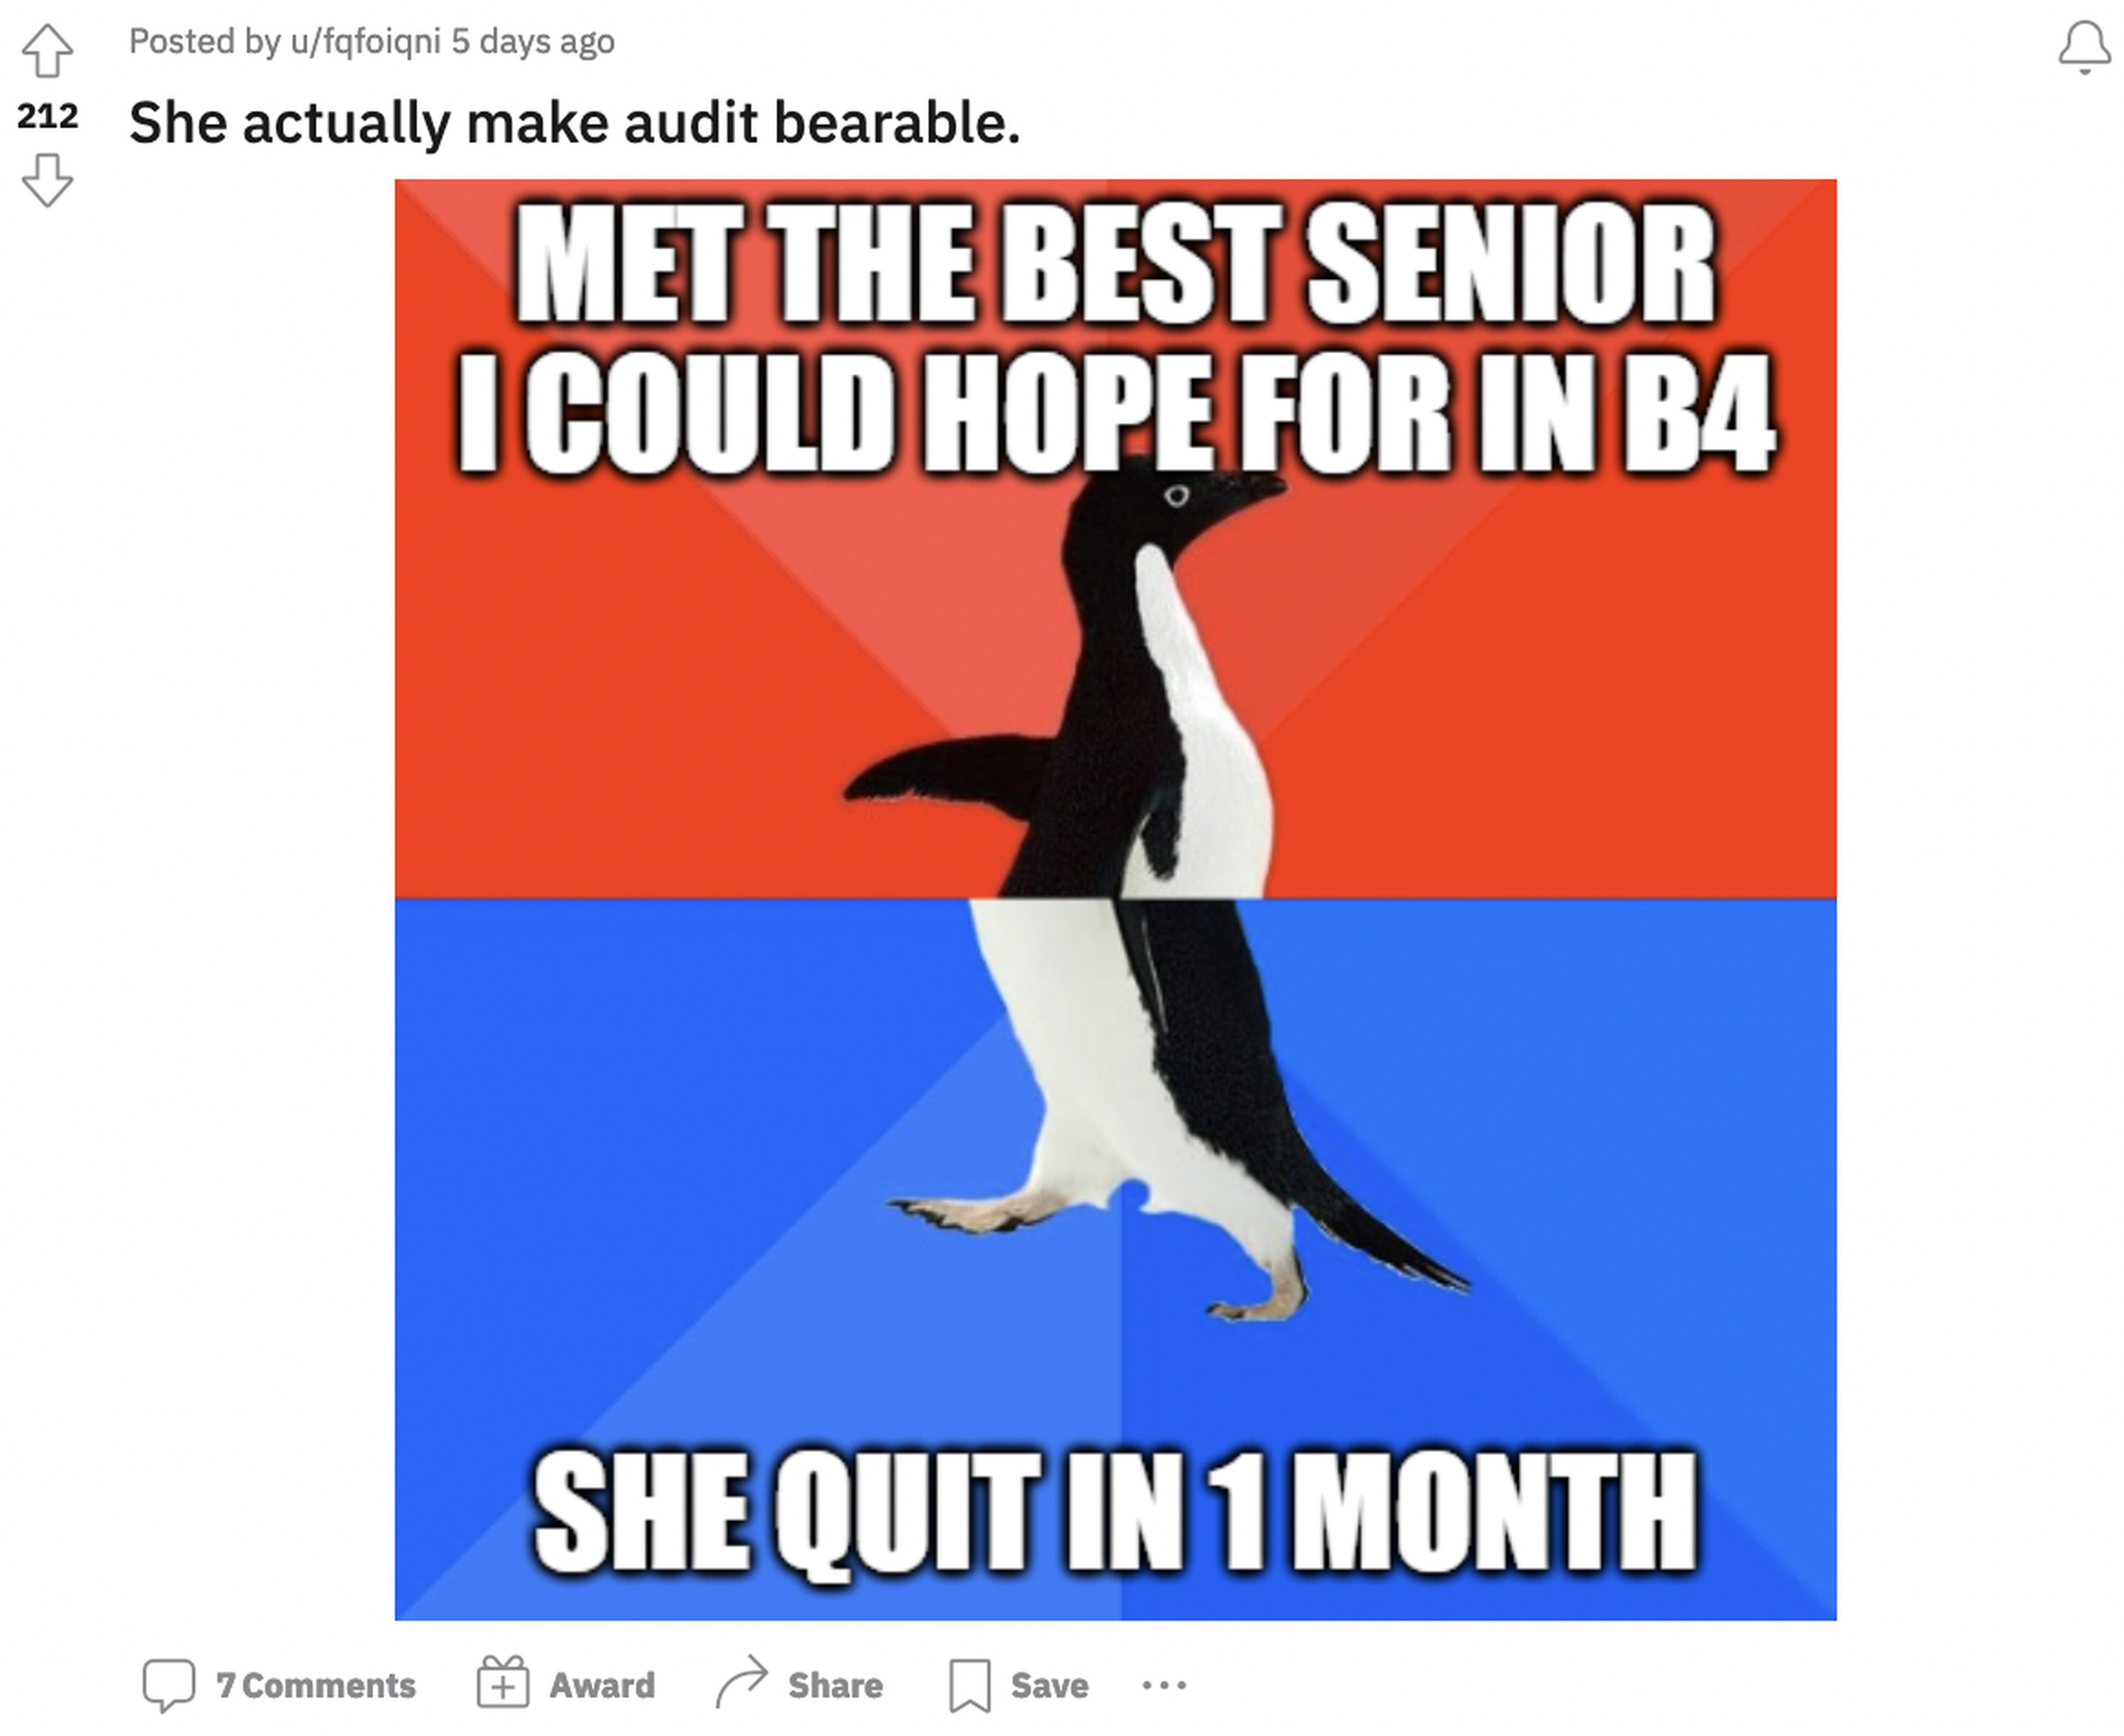 A penguin’s top half facing right, captioned “met the best senior I could hope for in b4.” The penguin’s bottom half, facing left, says “she quit in 1 month.”